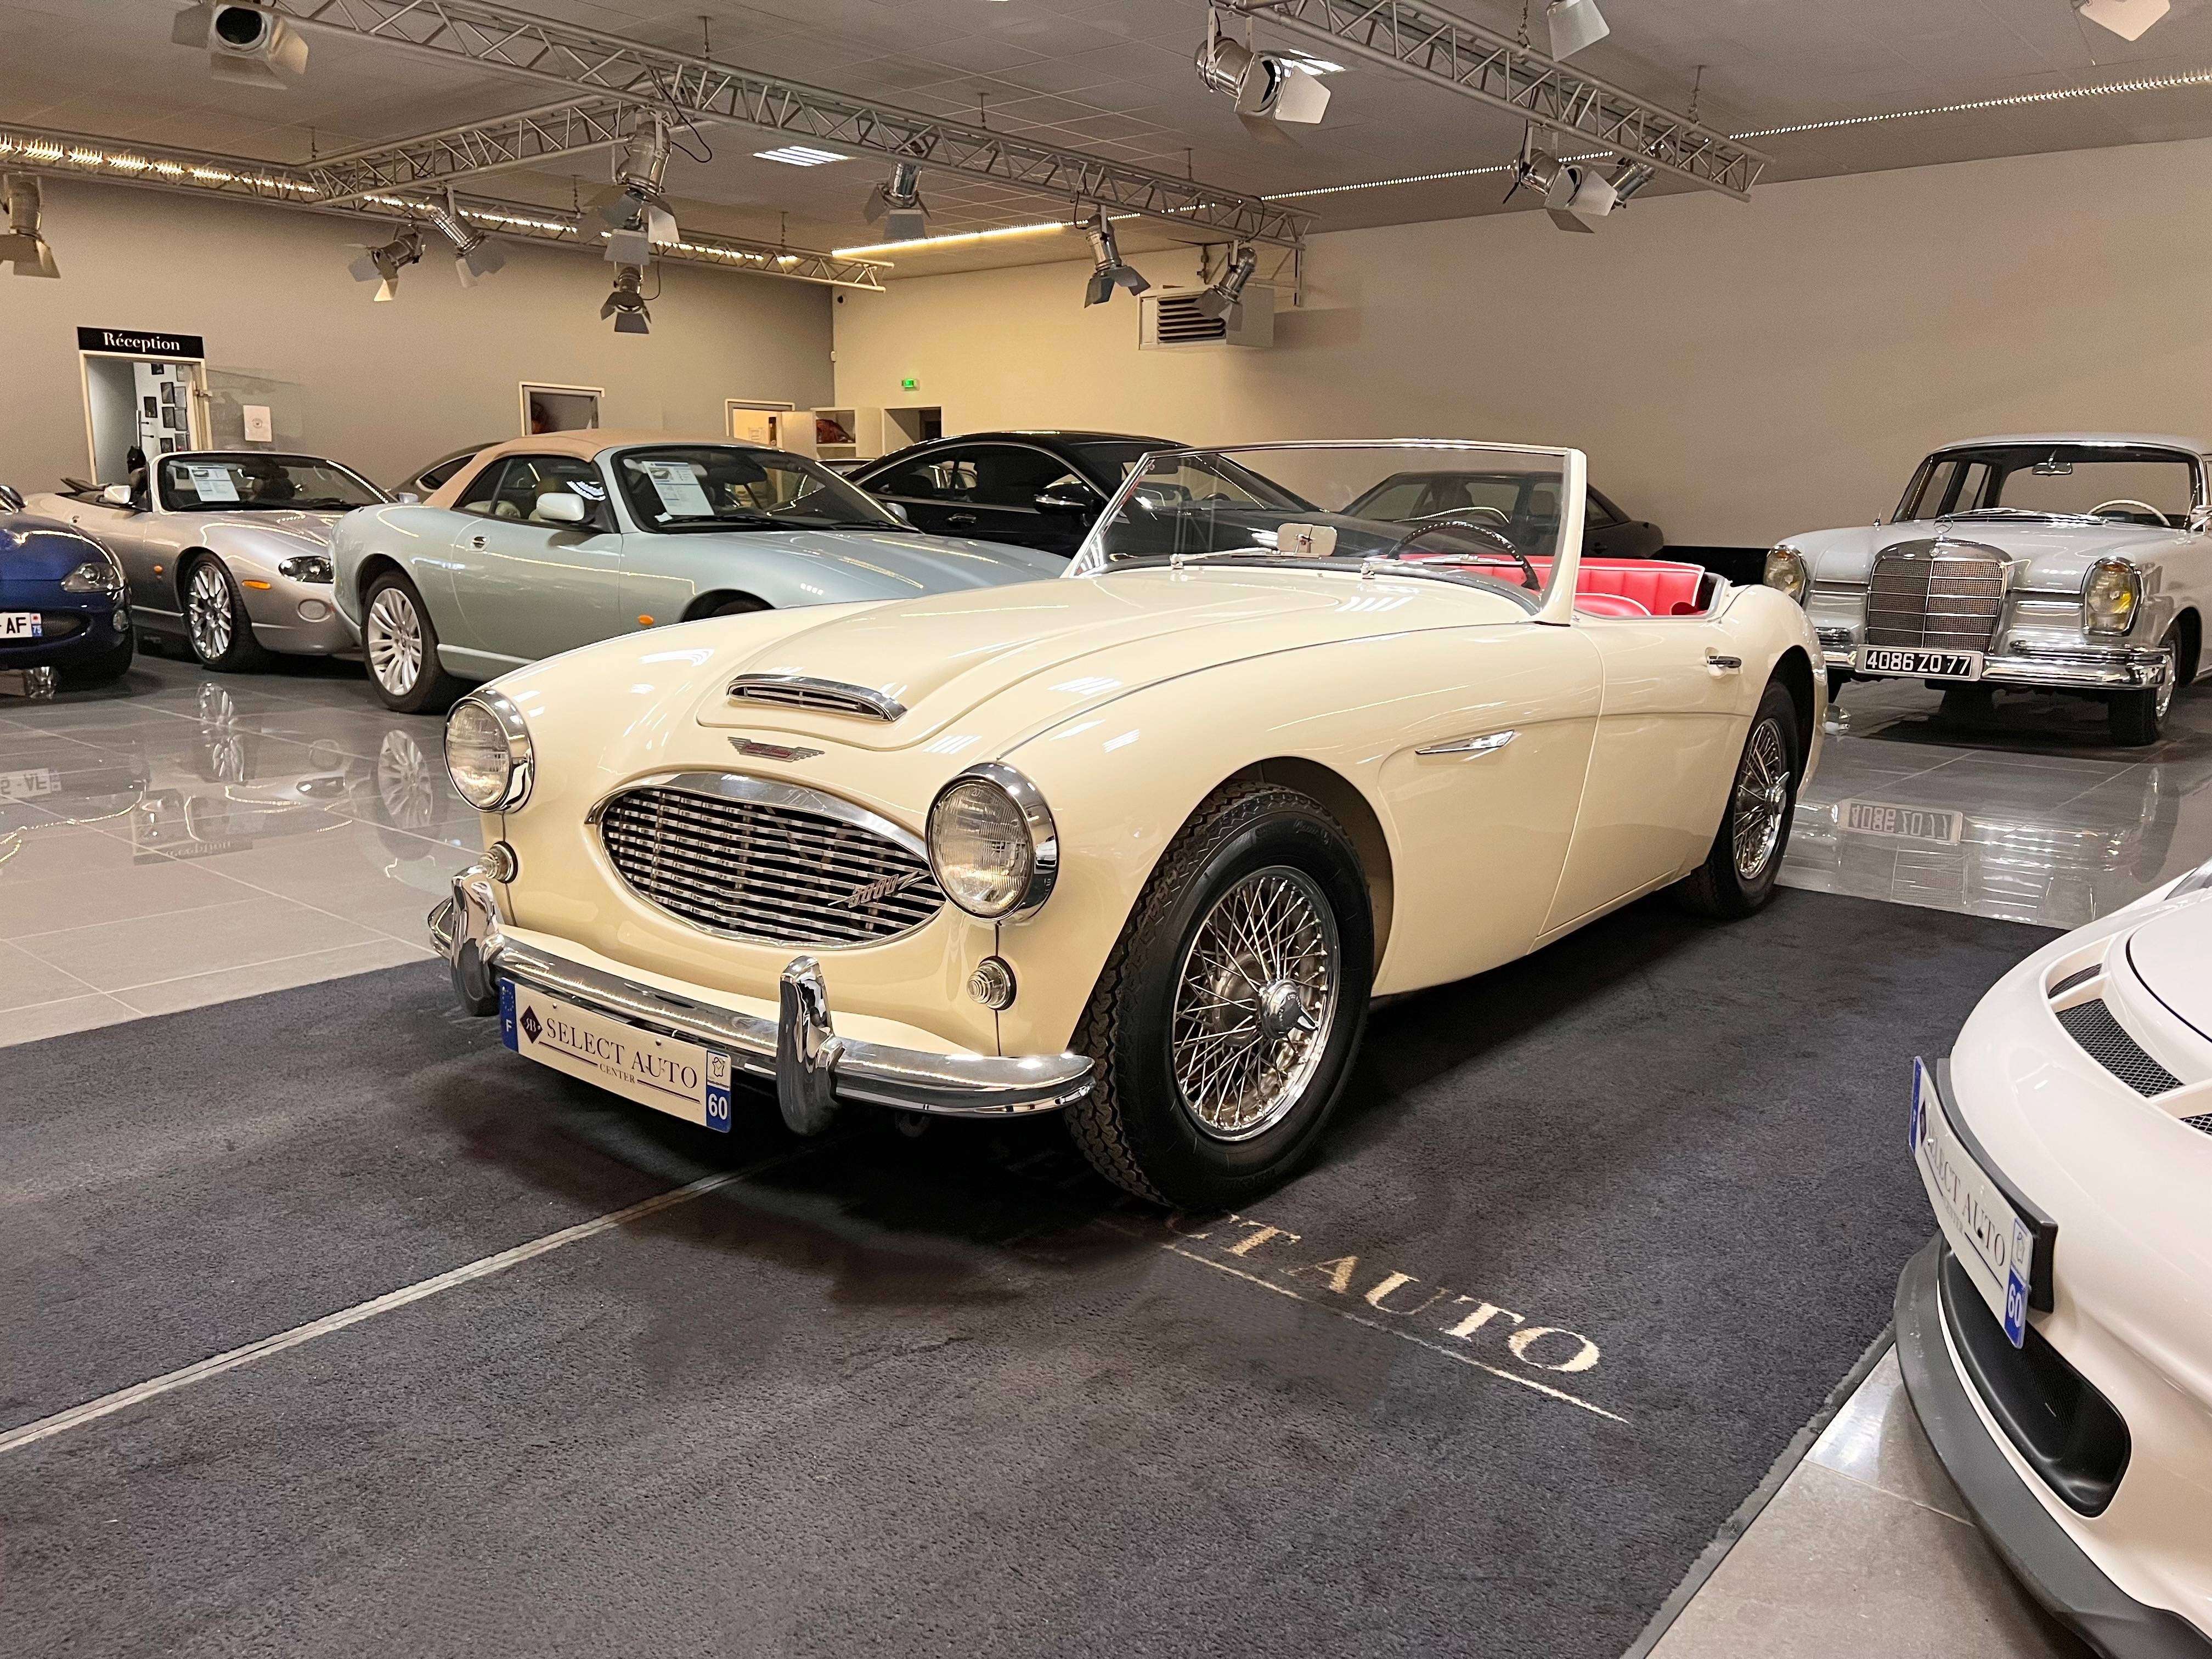 Austin MK Convertible in White used in Le Mesnil en Thelle for € 79,000.-